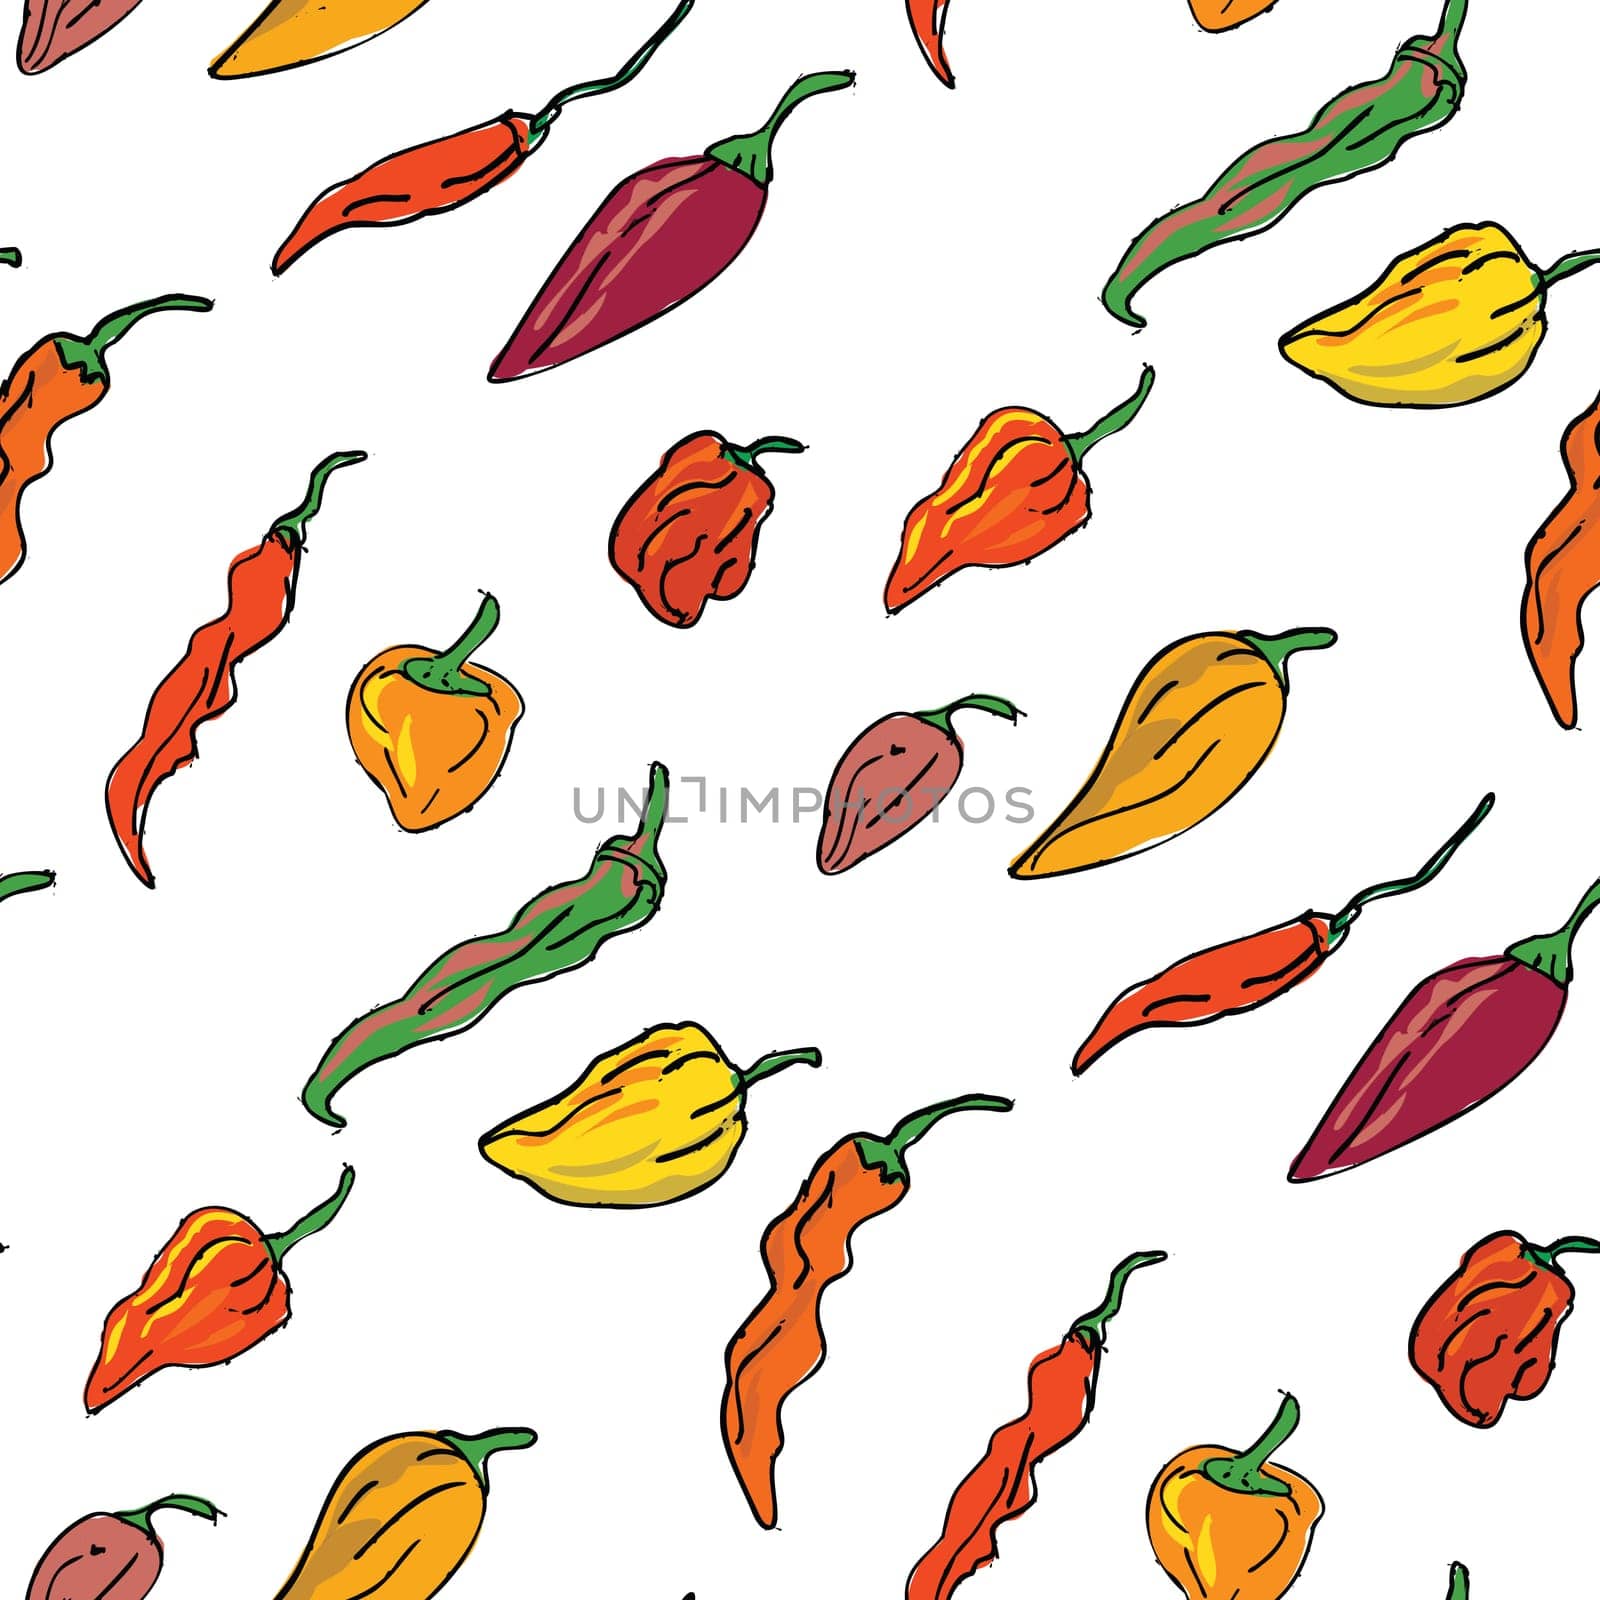 Tile seamless pattern in drawing sketch style illustration of a collection or set of different hot chili peppers on isolated white background.